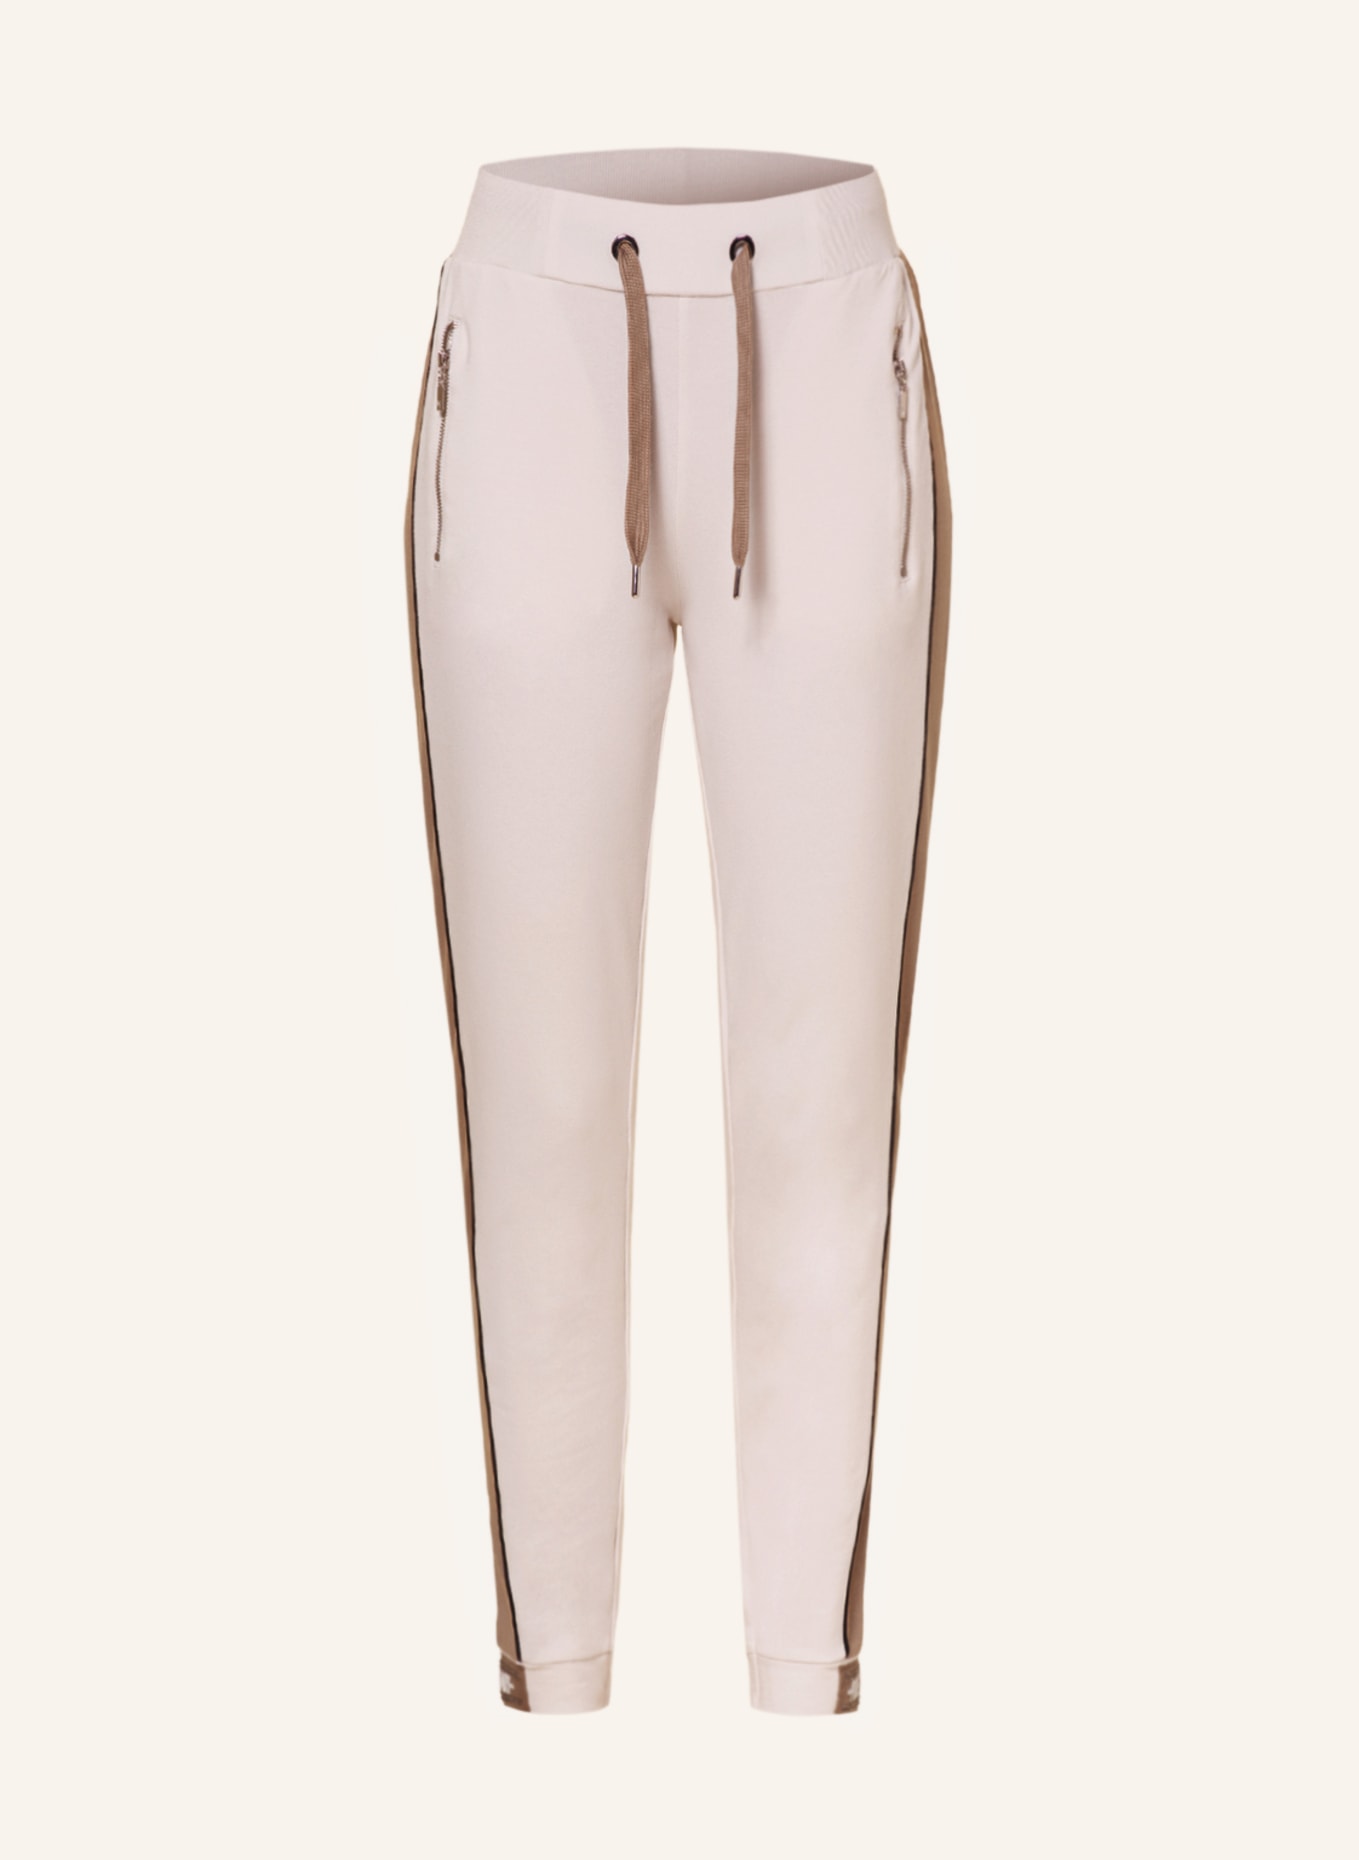 monari Pants in jogger style with tuxedo stripes, Color: CREAM/ BEIGE (Image 1)